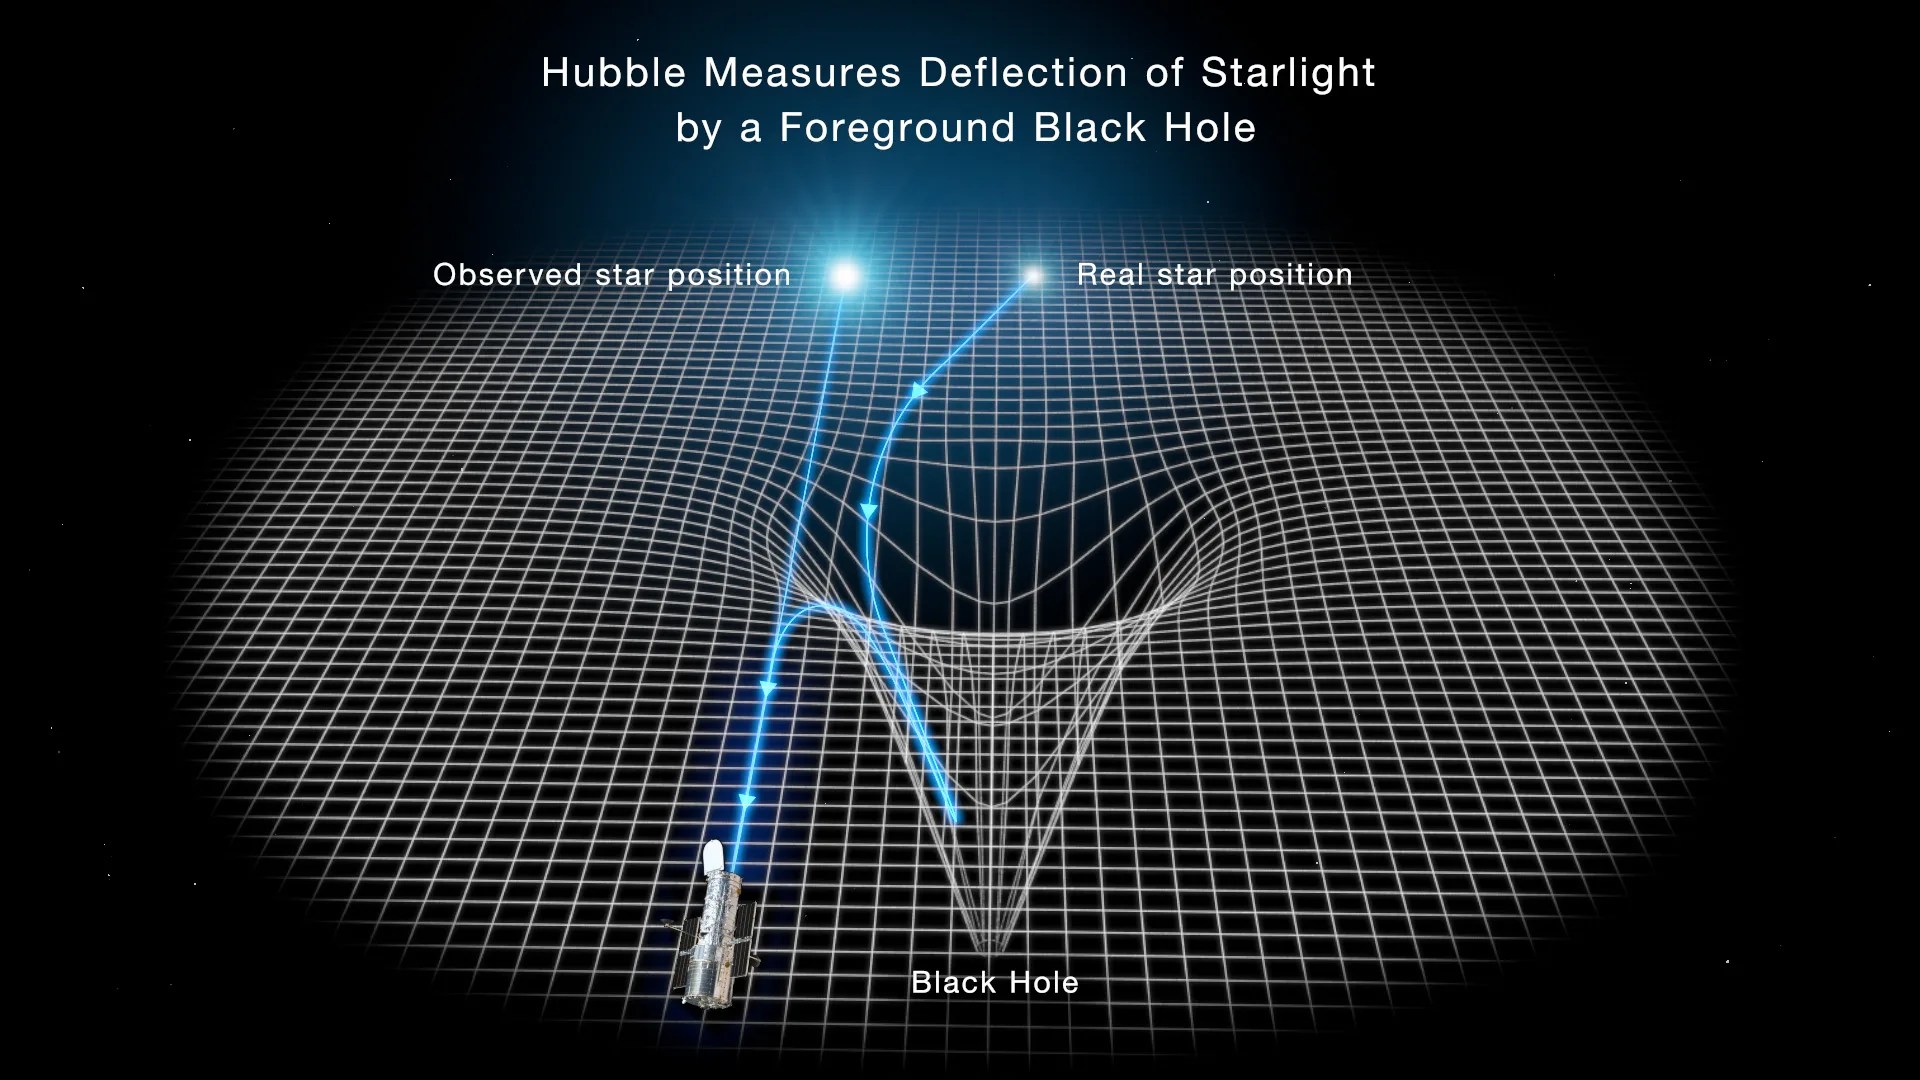 Illustration: white grid pattern on black background representing the fabric of space and time. Black hole creates a well in this fabric. Star's light is bent around the black hole.